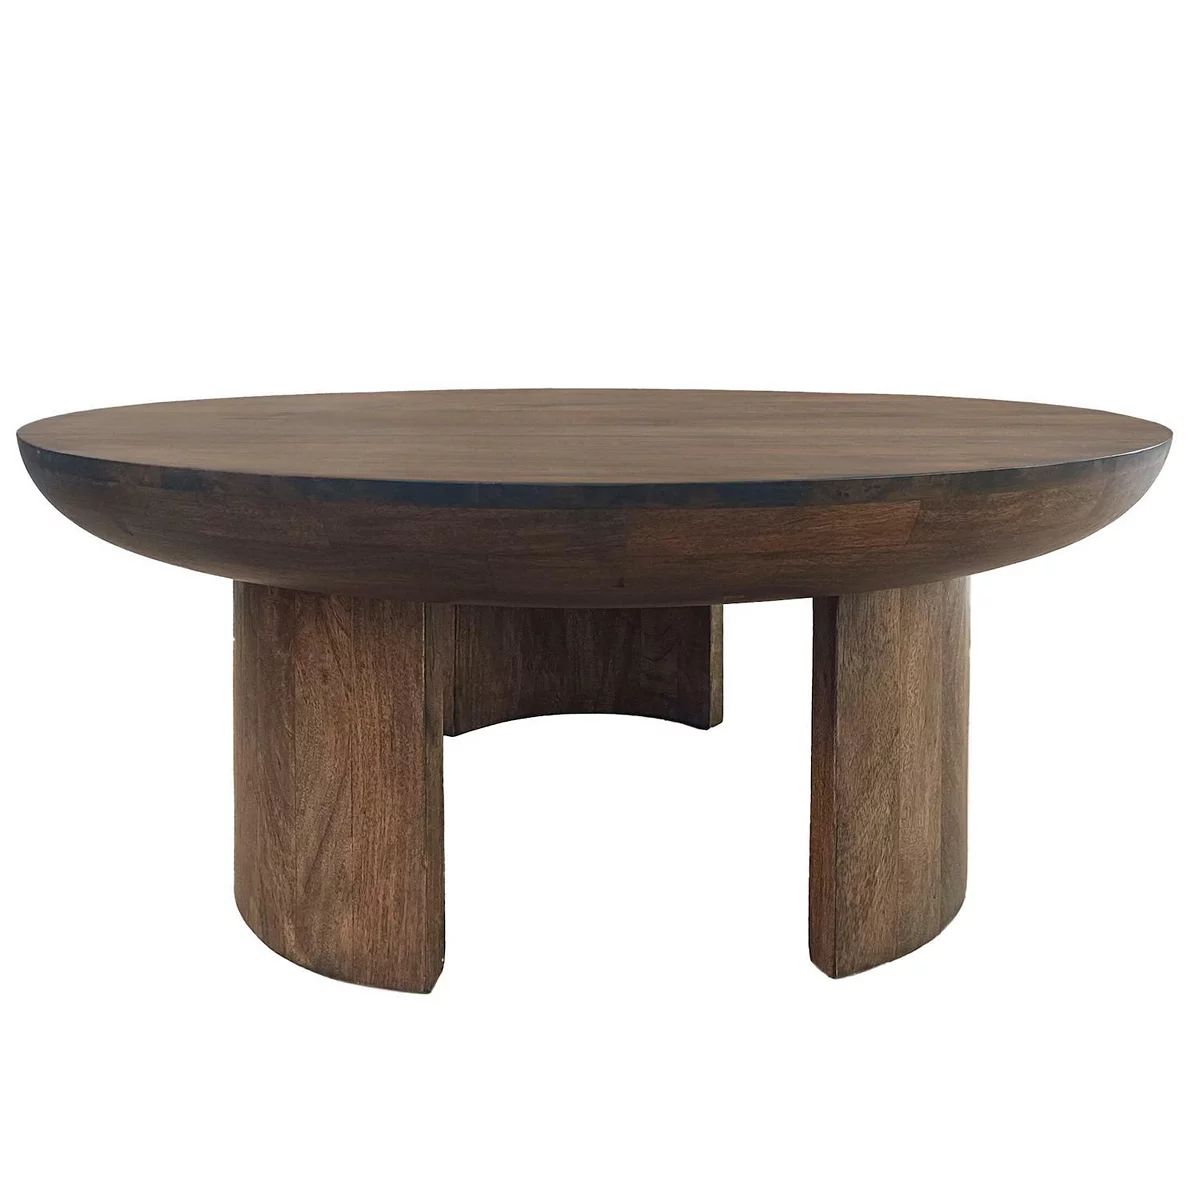 35 Inch Coffee Table, Handcrafted Round Mango Wood Top, Modern Curved Tripod Legs, Walnut Brown | Kohl's